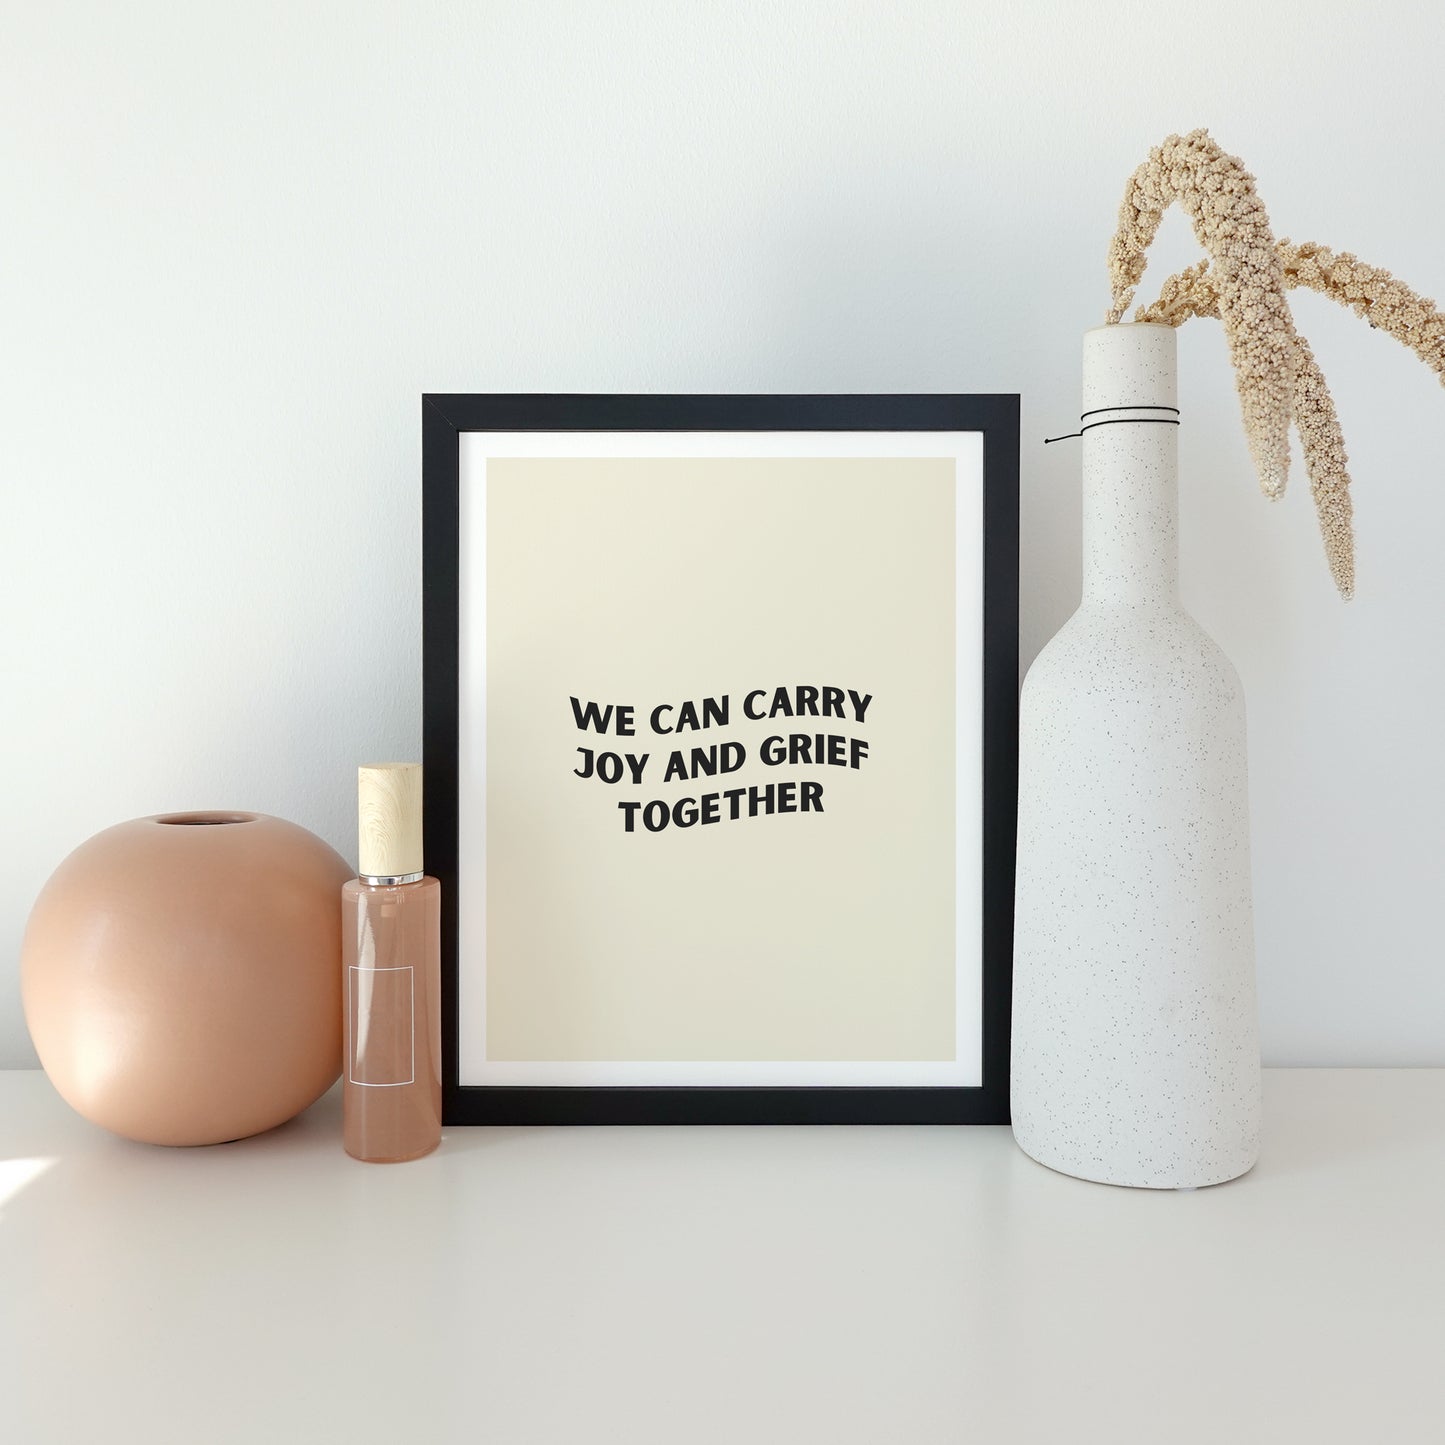 We Can Carry Joy and Grief Together Digital Print